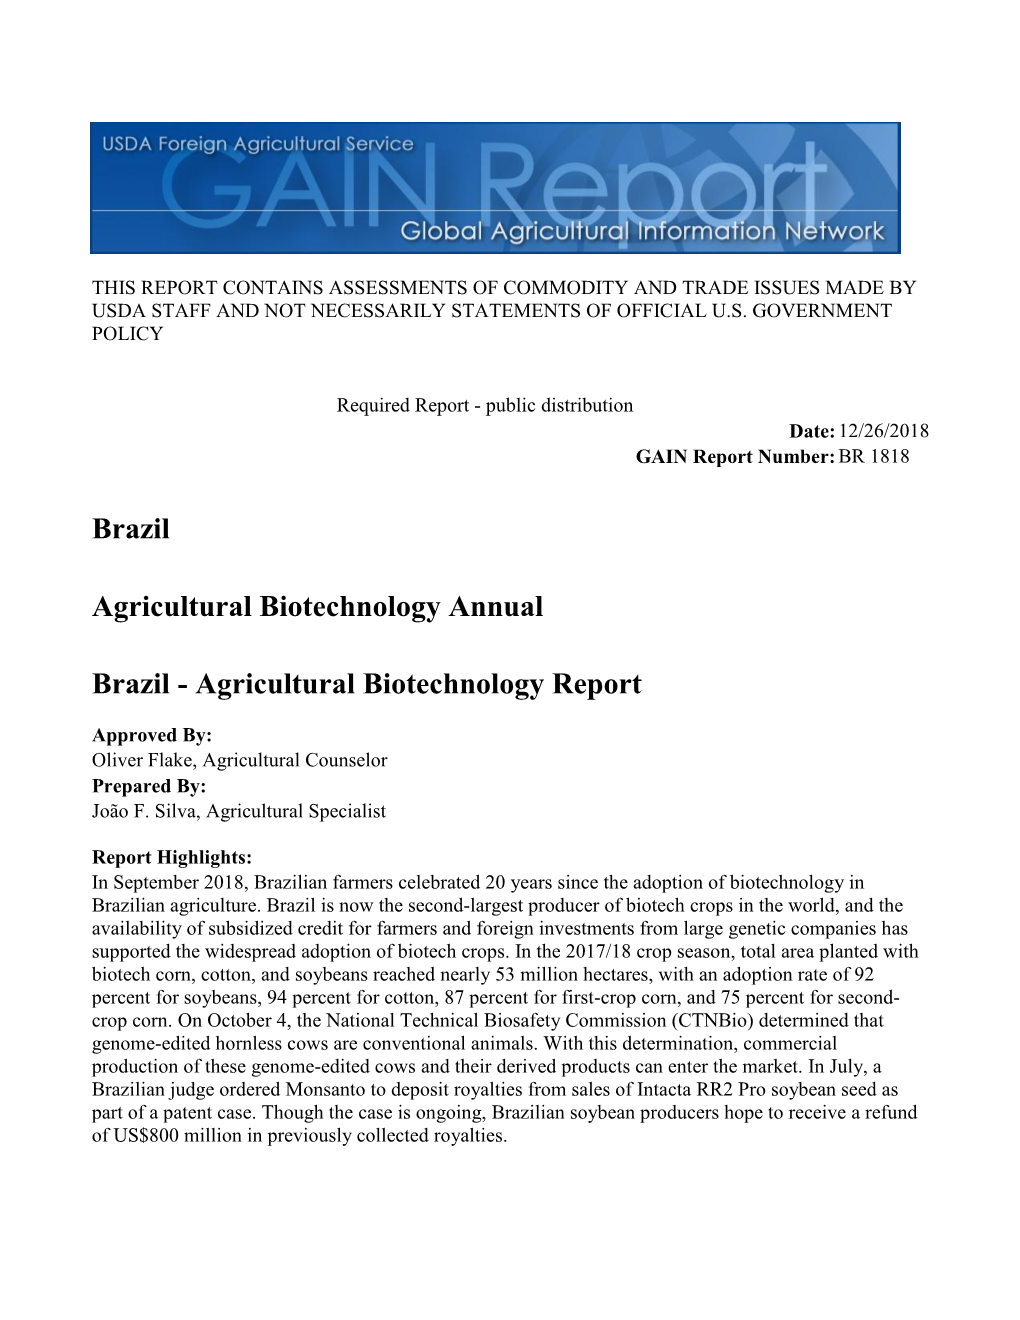 Brazil Agricultural Biotechnology Annual Brazil